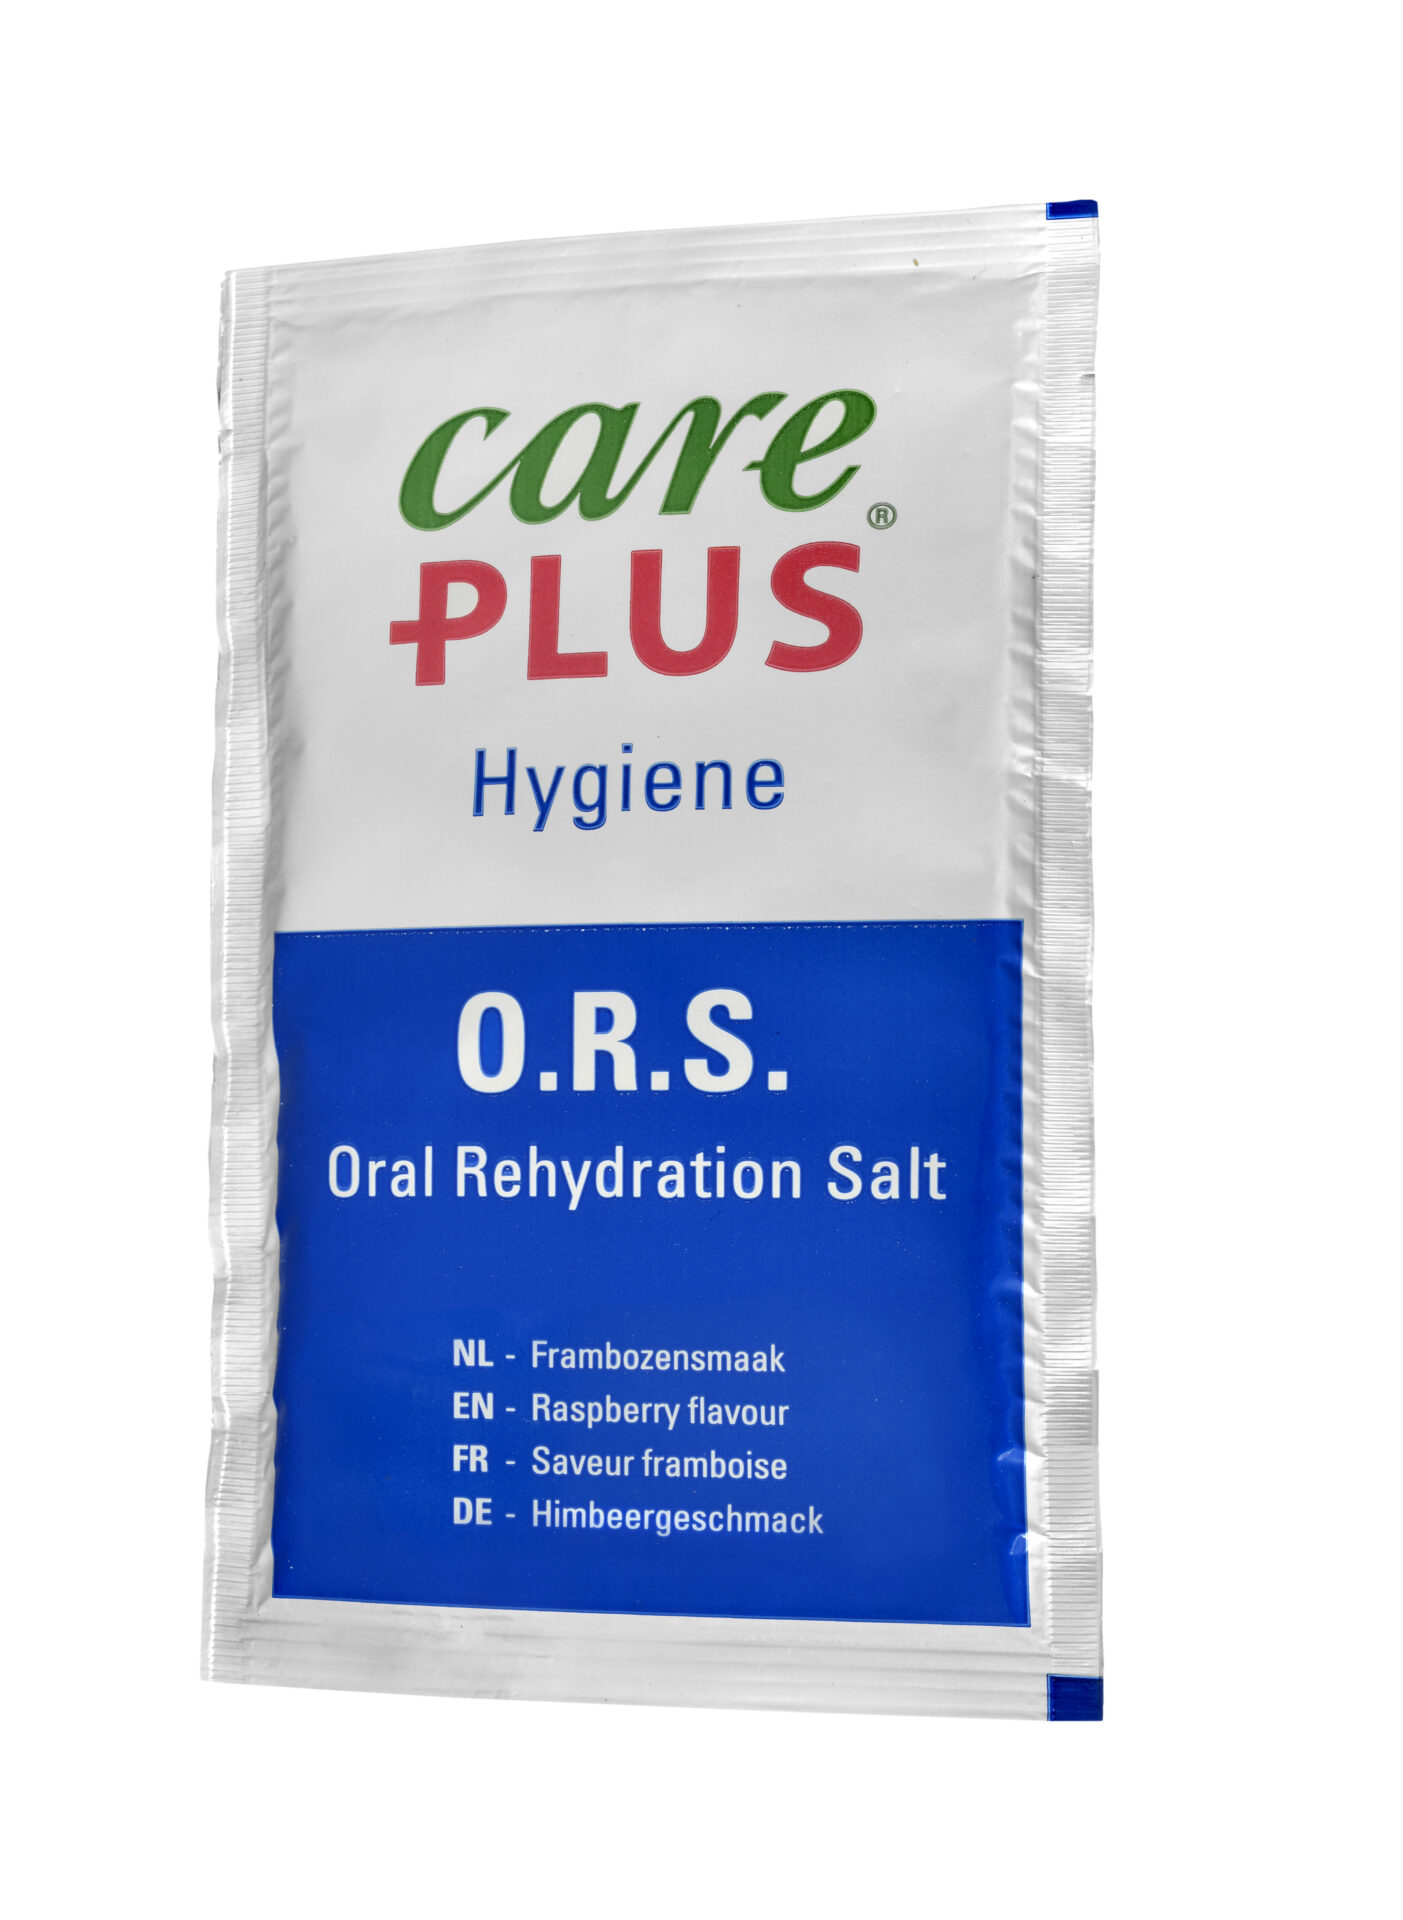 Care Plus ORS against dehydration in the flavors pomegranate and orange in handy bags.